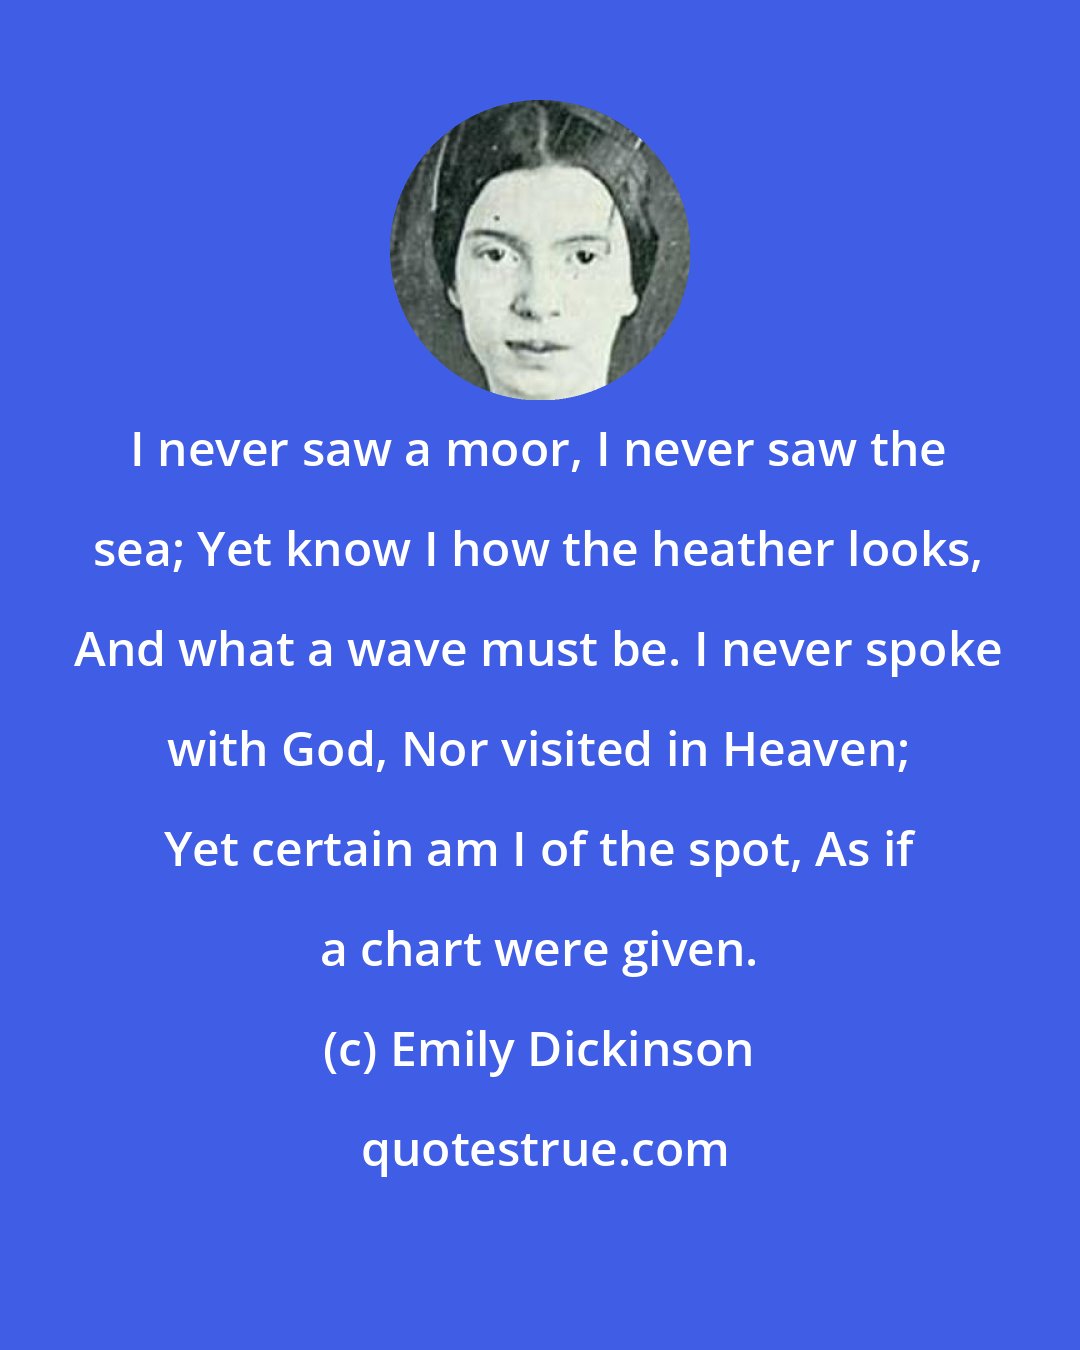 Emily Dickinson: I never saw a moor, I never saw the sea; Yet know I how the heather looks, And what a wave must be. I never spoke with God, Nor visited in Heaven; Yet certain am I of the spot, As if a chart were given.